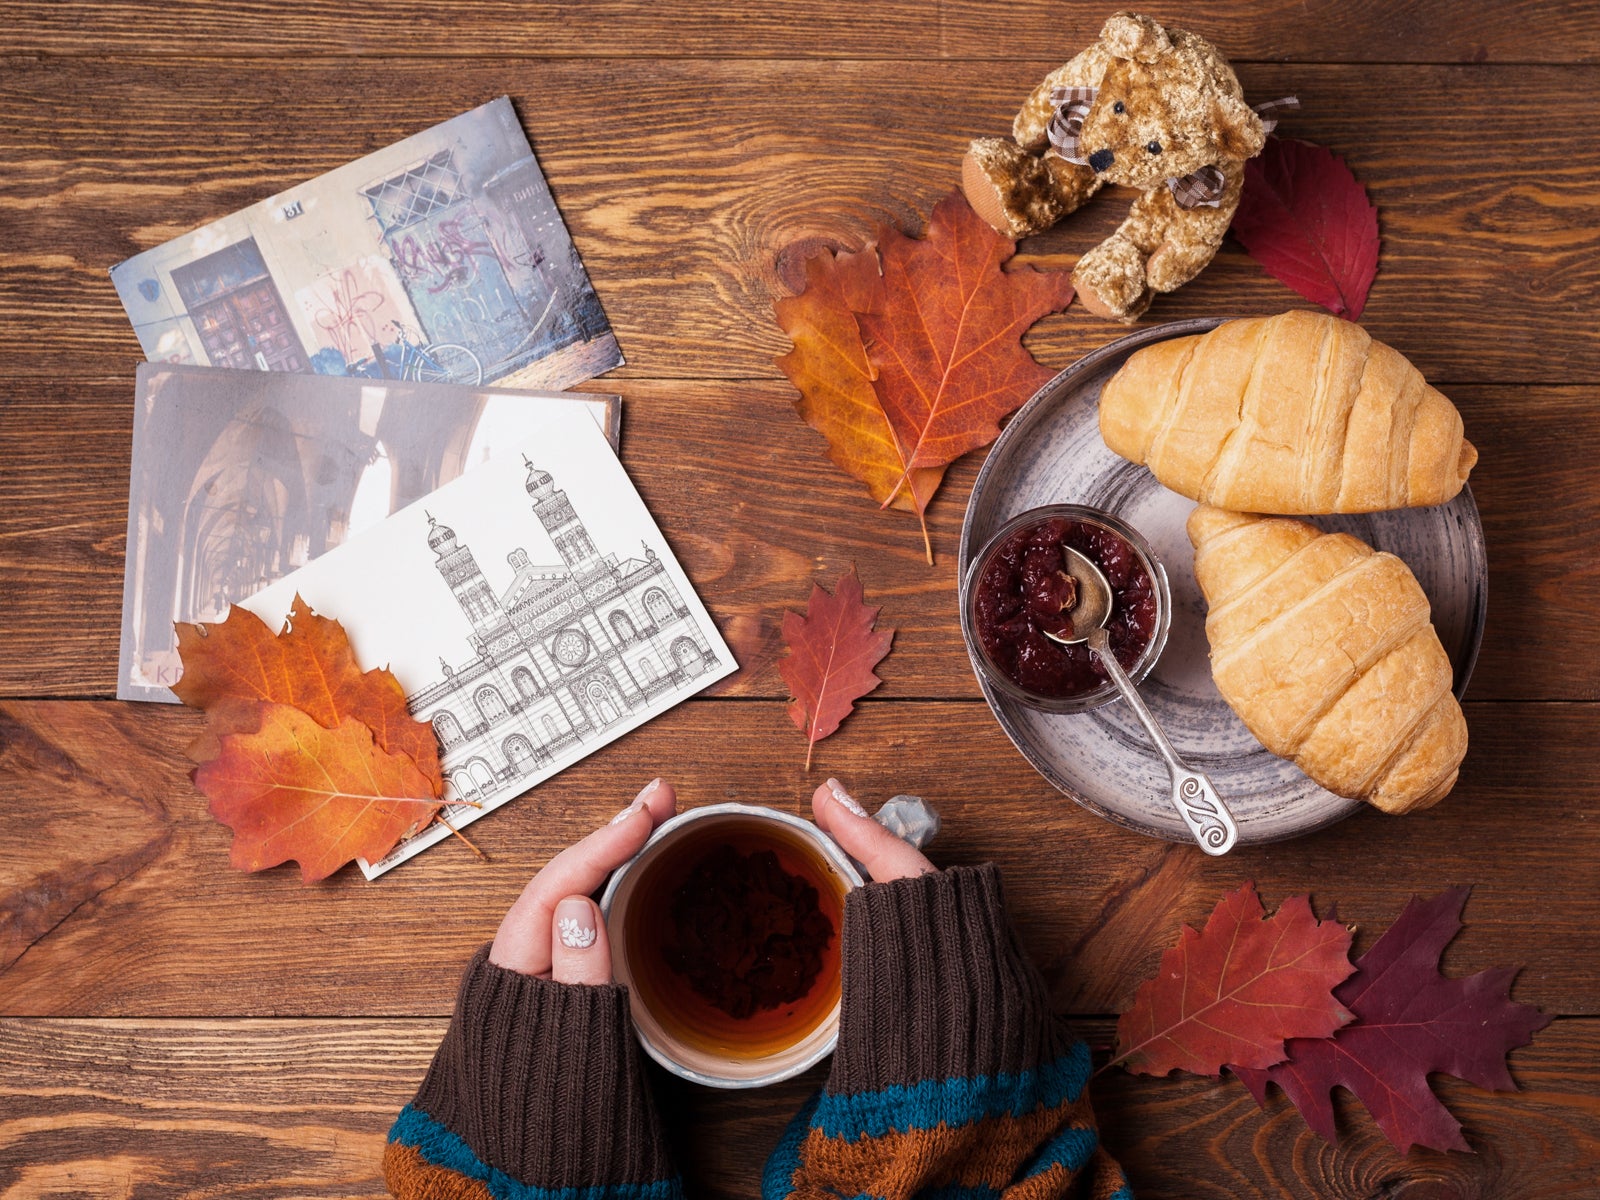 ditching thanksgiving to travel abroad_photo by mariana-medvedeva via unsplash